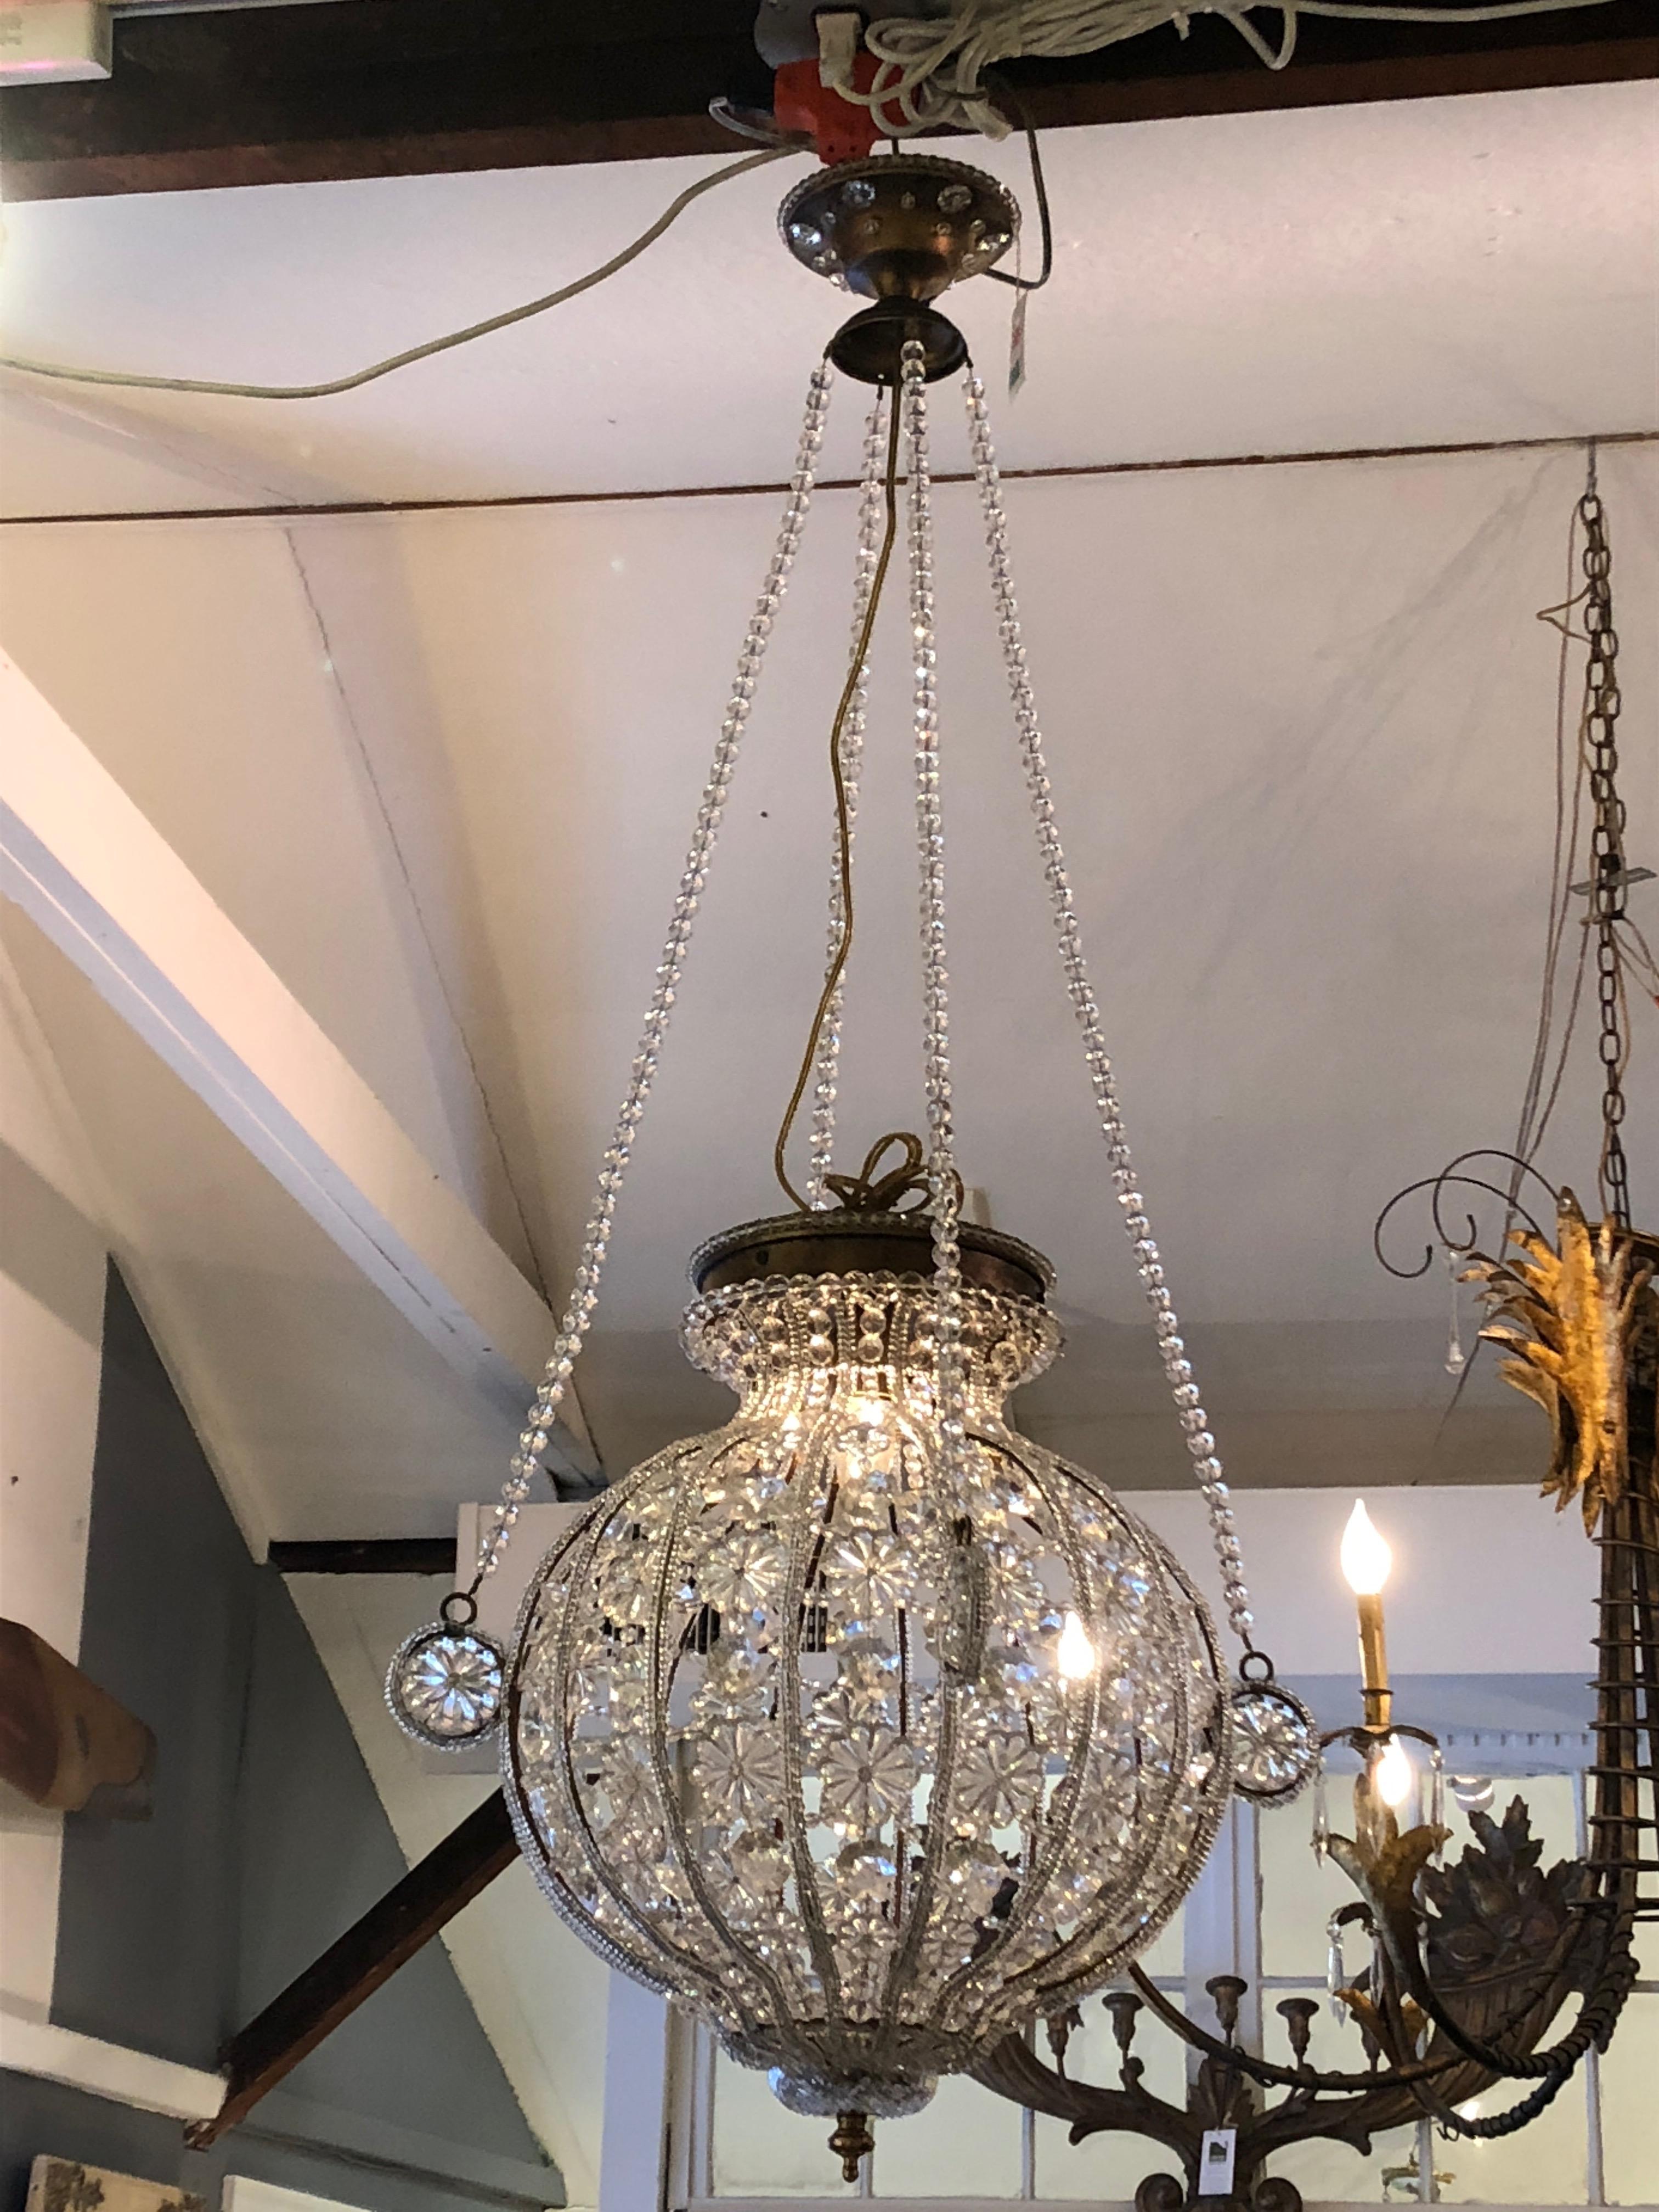 Contemporary Romantic Crystal Spherical Chandelier Pendant with Florets